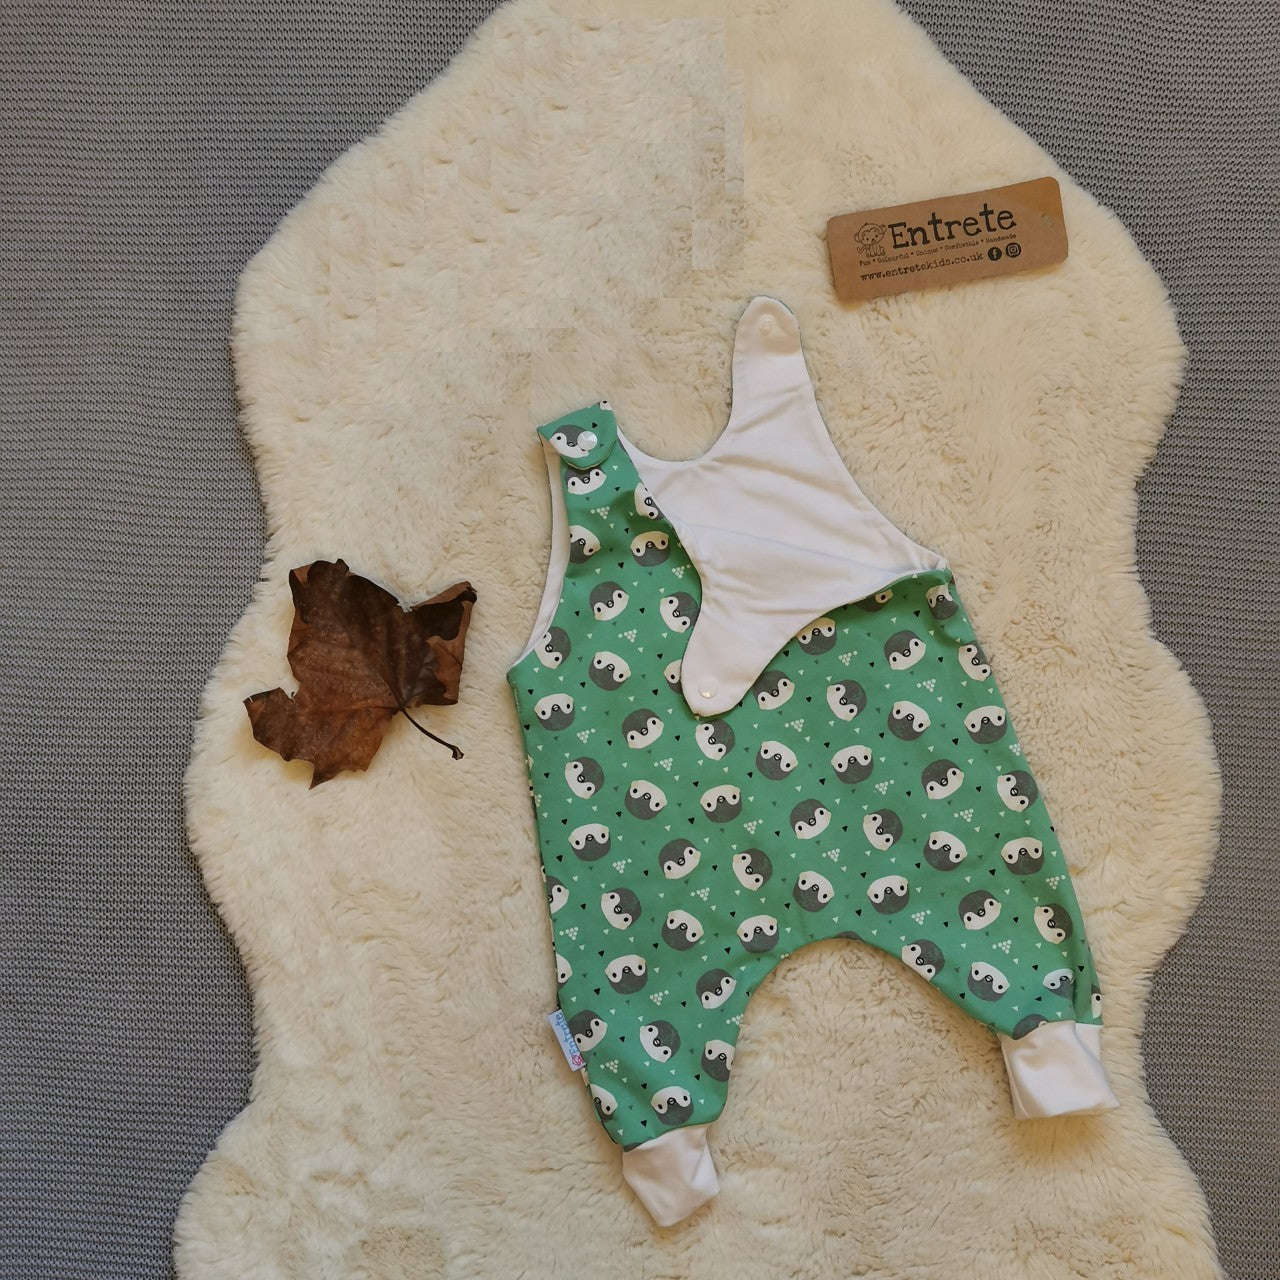 The gorgeously ethical organic mint penguins sleeveless romper. Handmade using mint penguins and white organic cotton jerseys' with a natural bamboo lining. Shown with one of the shoulder poppers open.